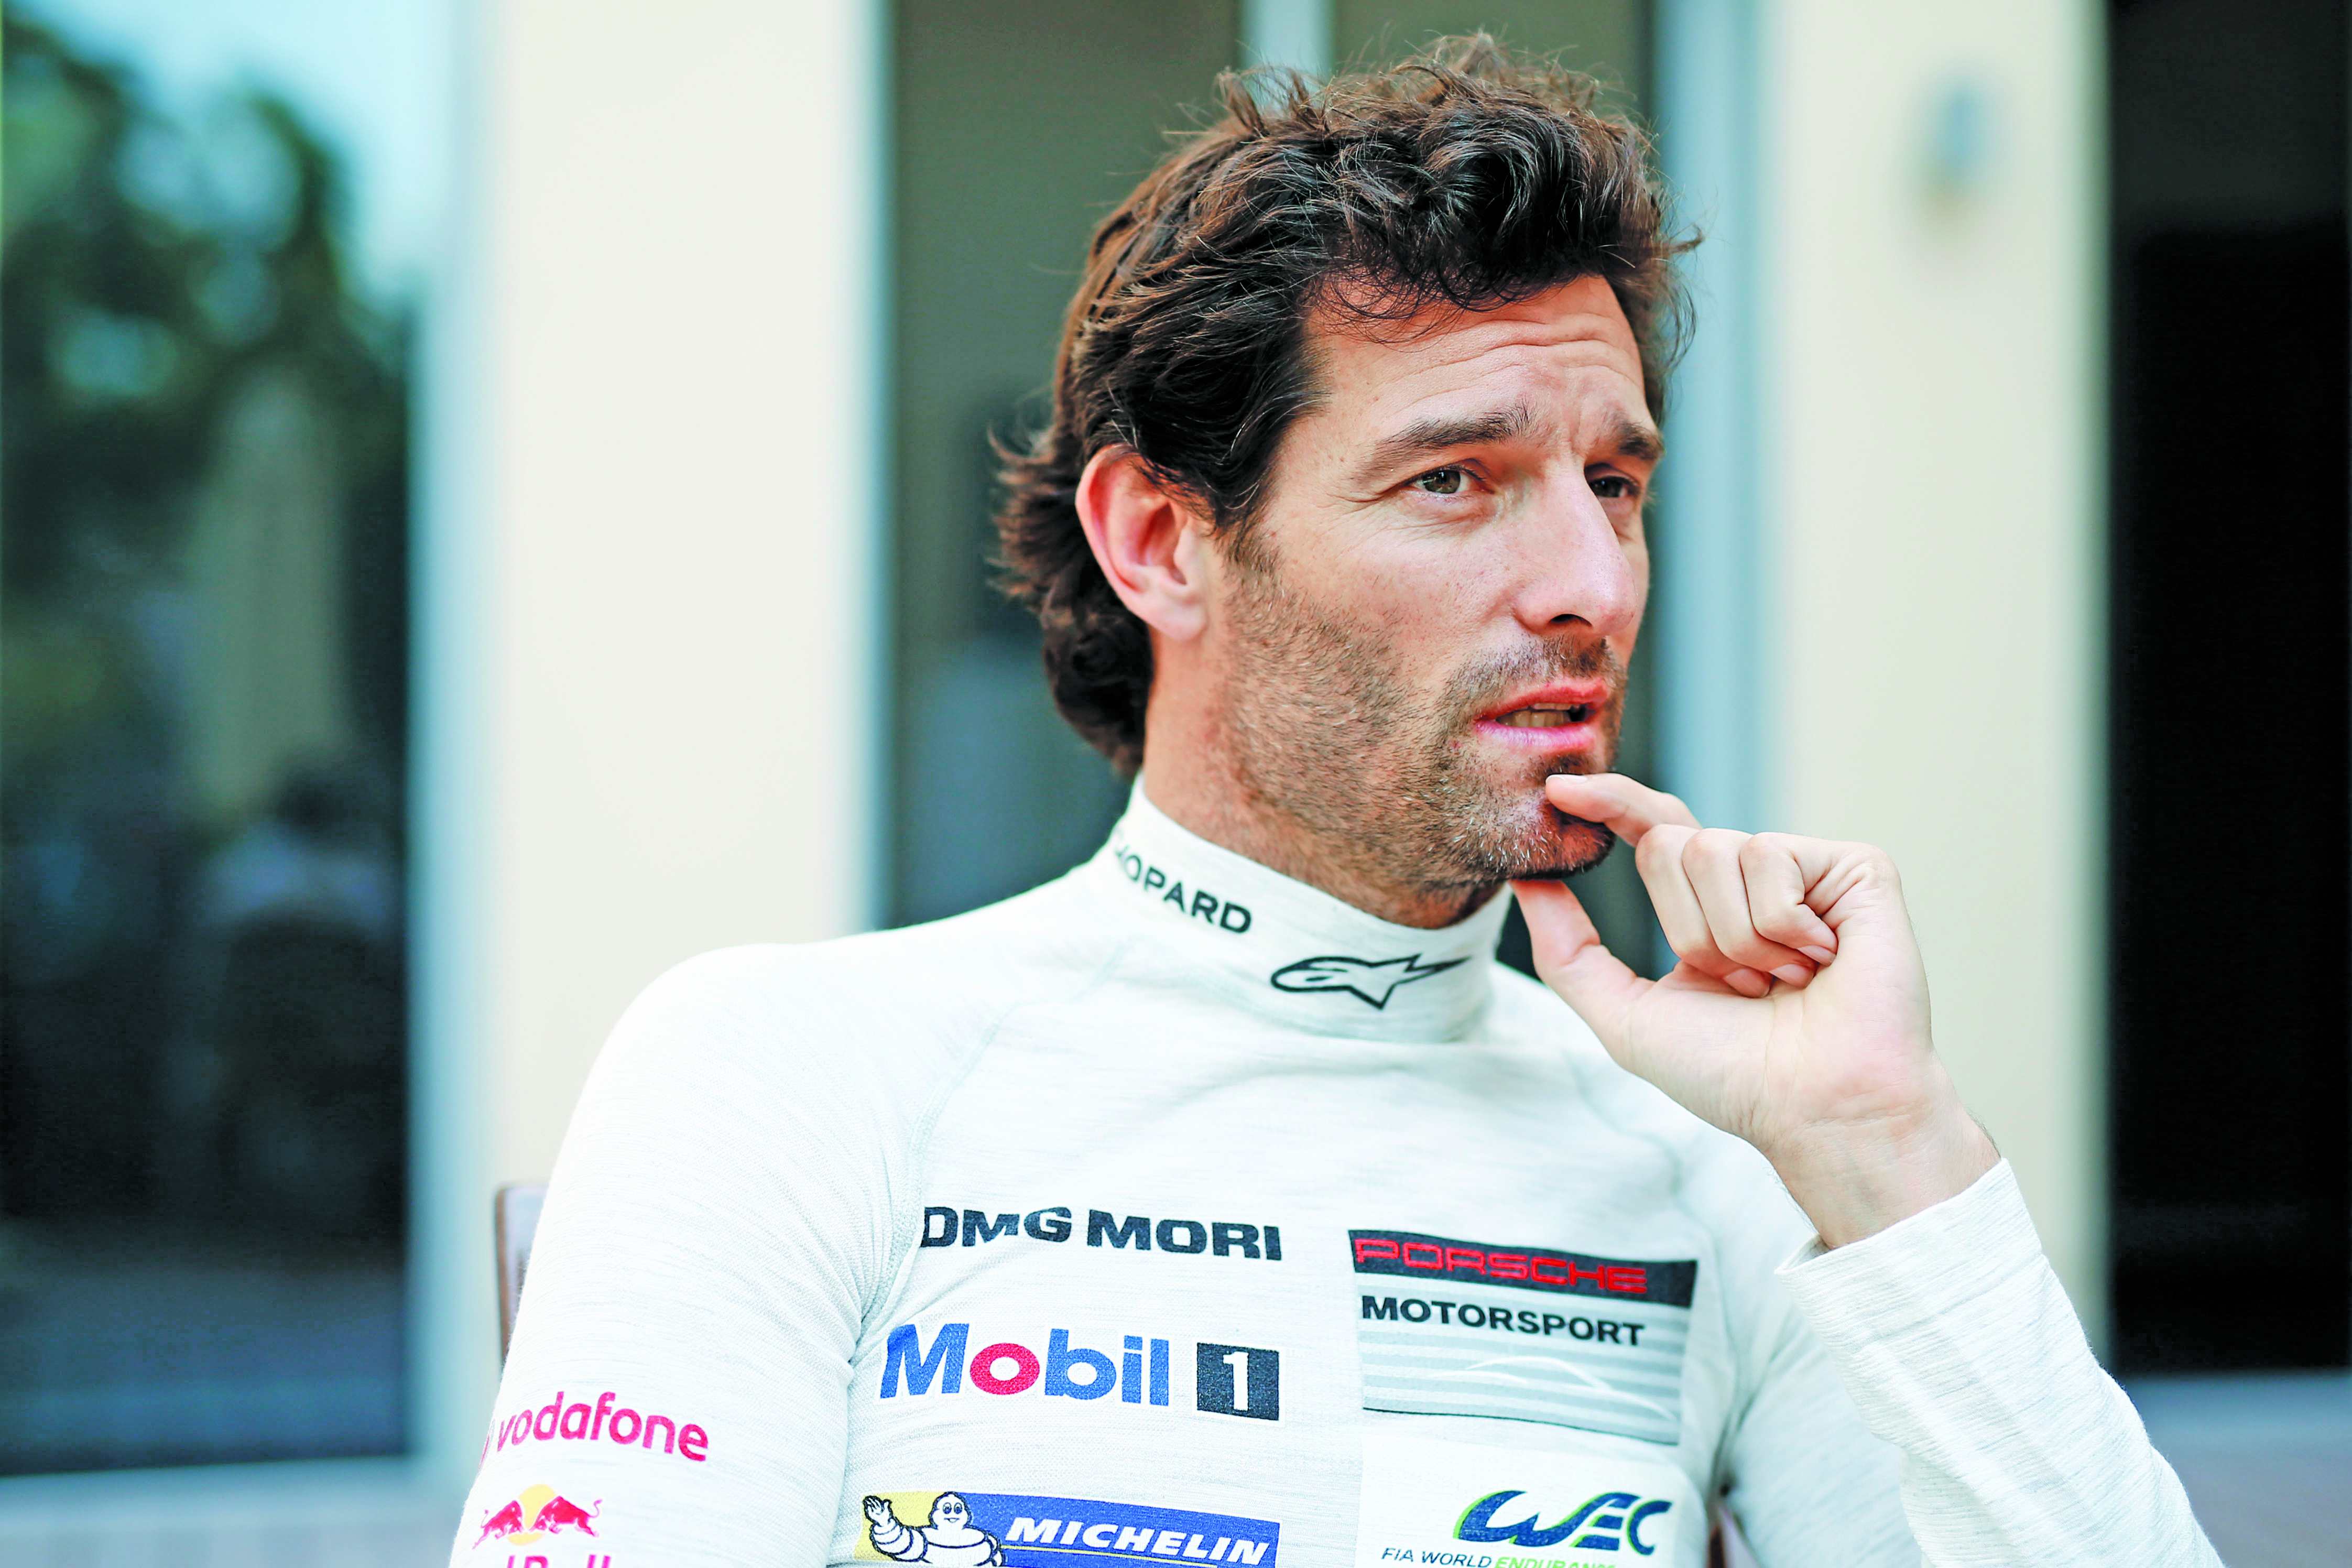 Exclusive: It's not easy for F1 drivers to get into Endurance Racing, says Mark Webber